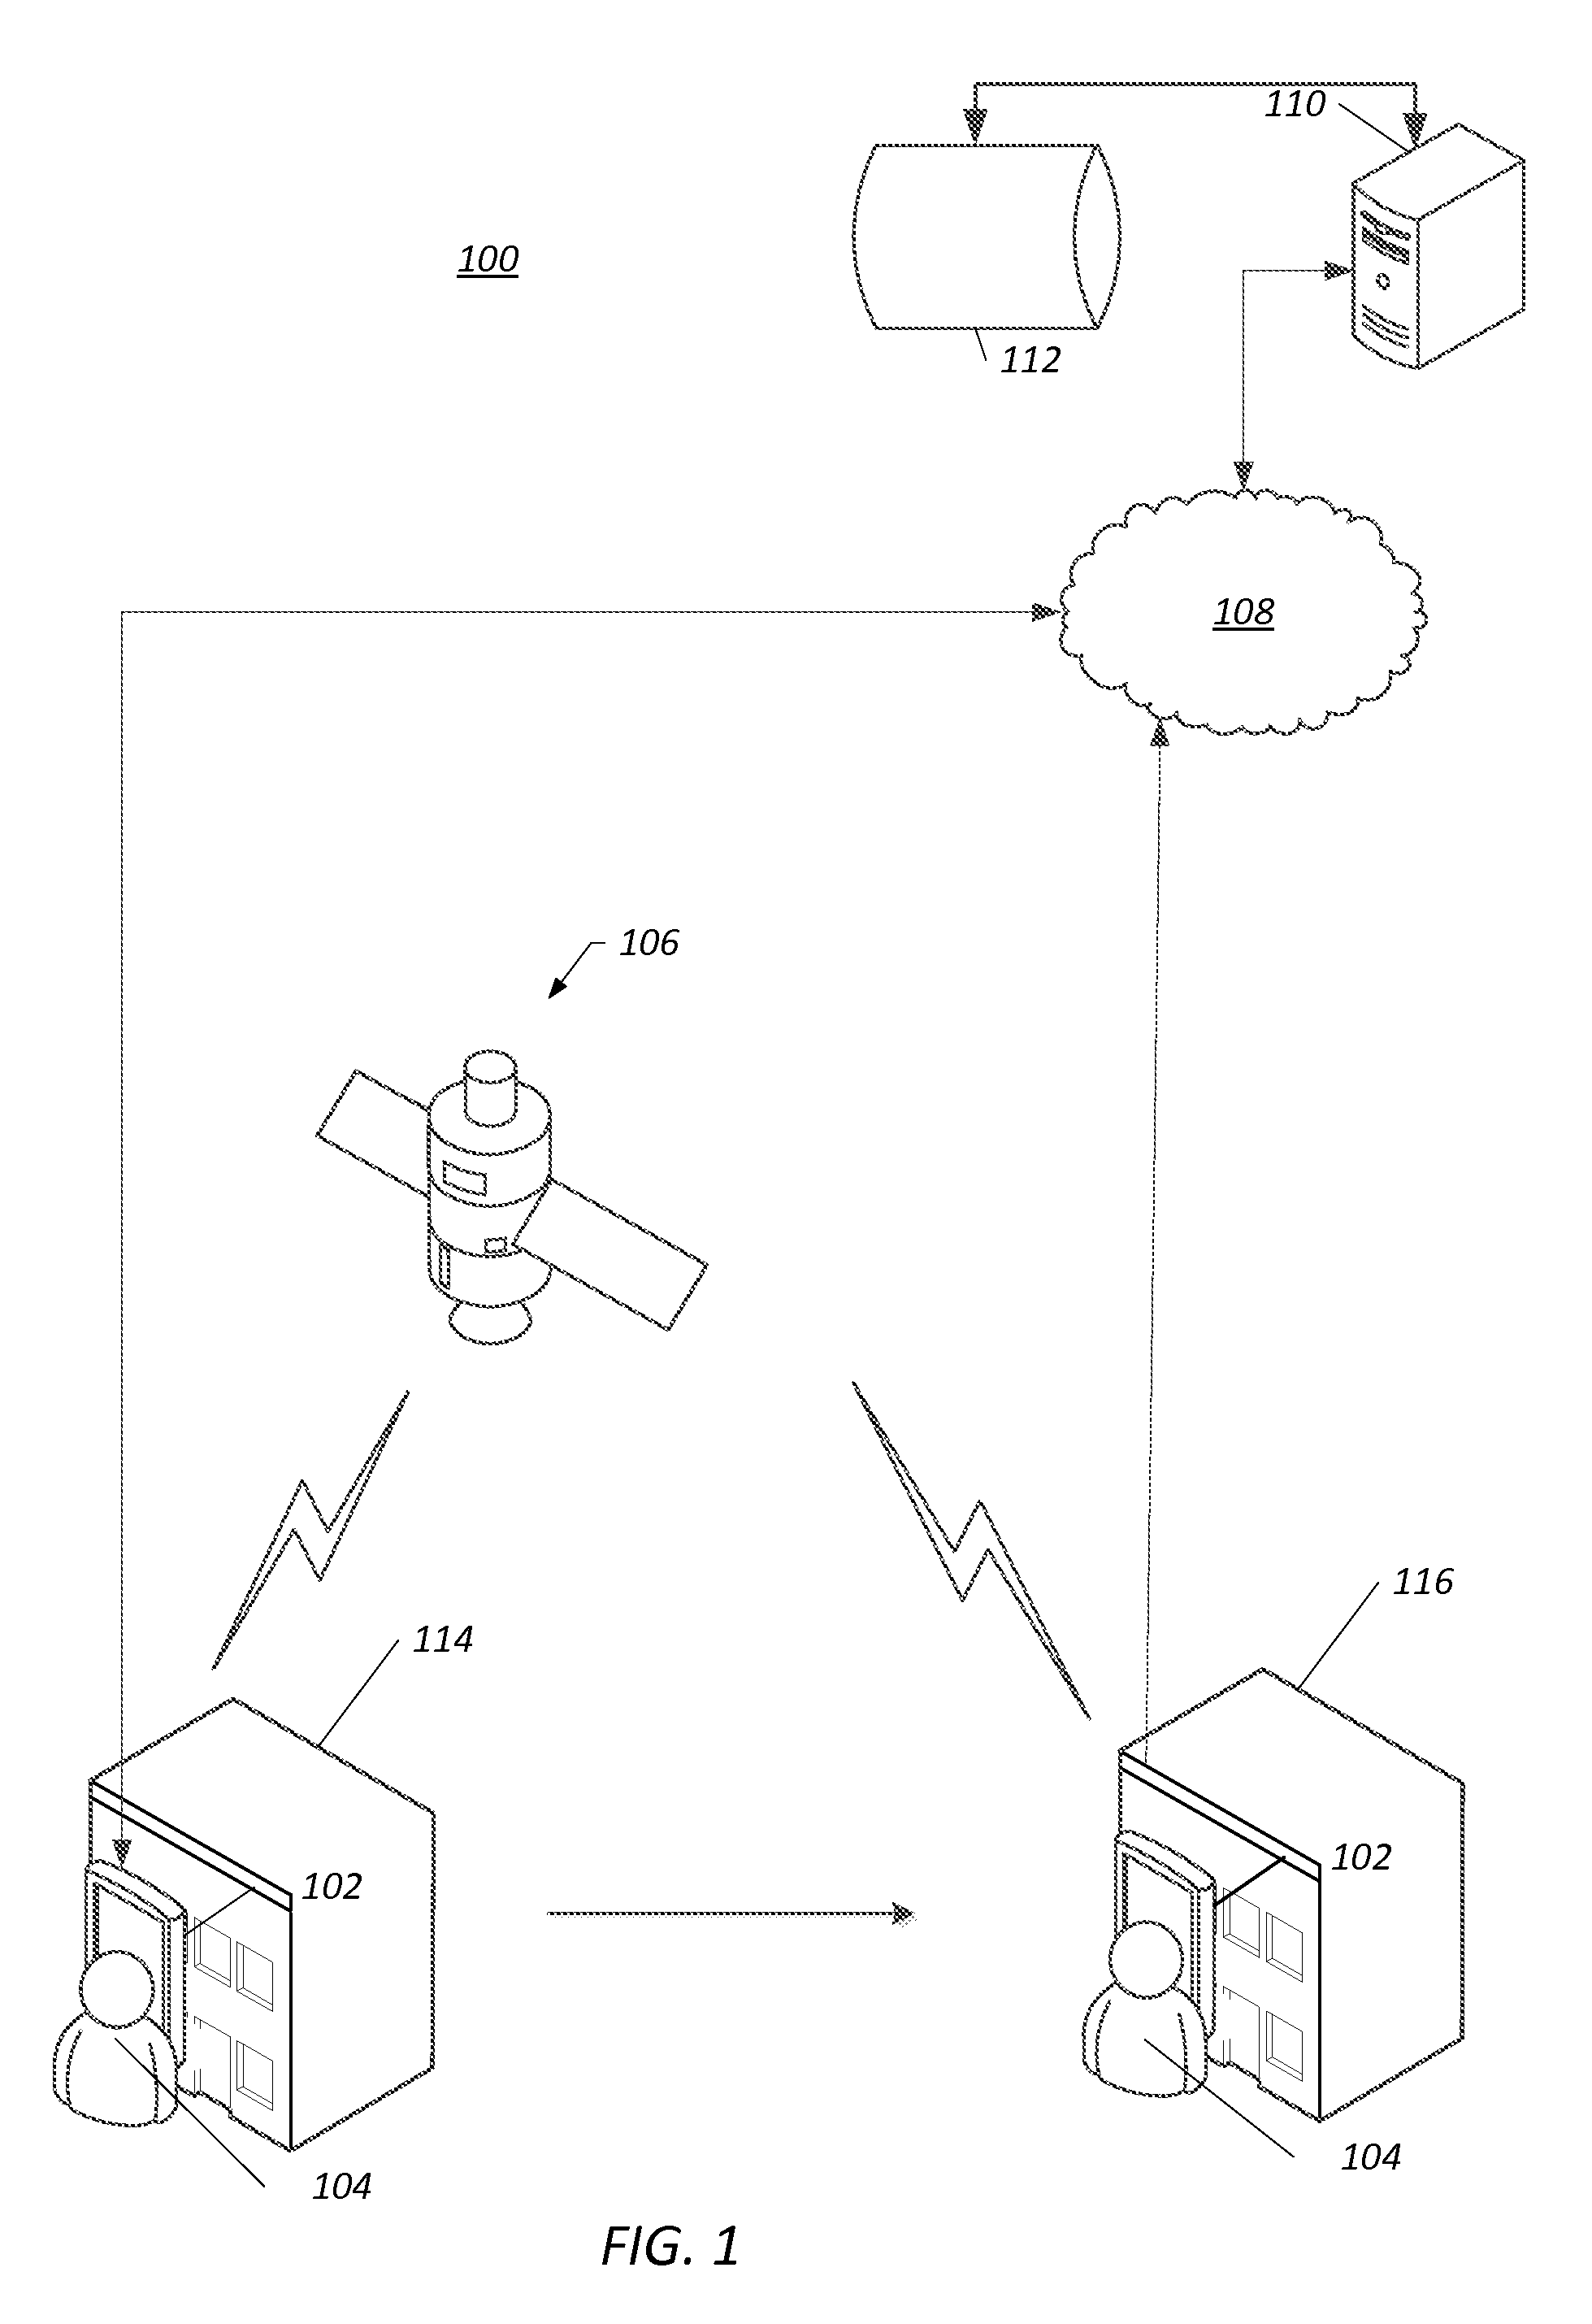 Systems and methods for determining the operating hours of an entity